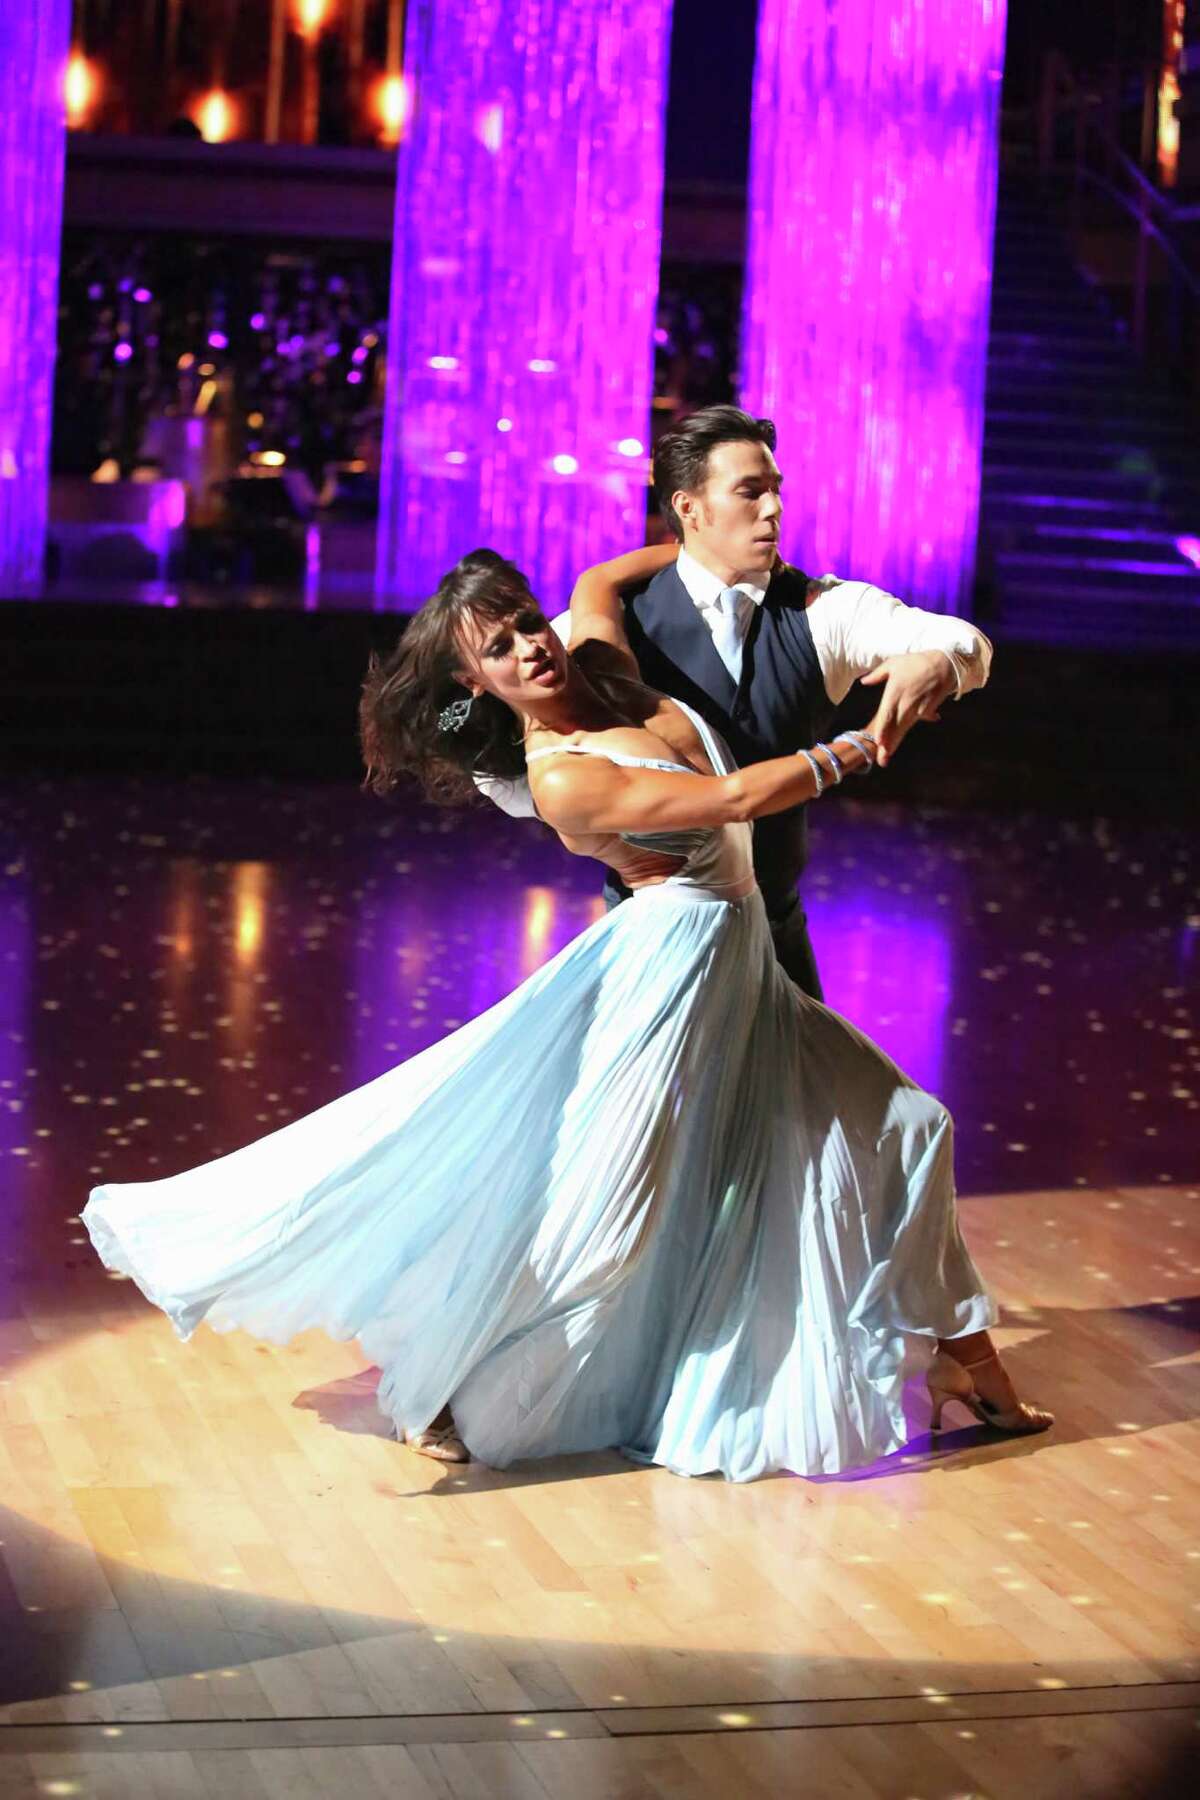 Karina Smirnoff and her partner Apolo Anton Ohno on "Dancing with the Stars. DANCING WITH THE STARS: ALL-STARS - "Episode 1510A" - In the two-hour Season Finale, the excitement continued with all of this season's eliminated couples returning to the ballroom, performing memorable routines of the season, on TUESDAY, NOVEMBER 27 (9:00-11:00 p.m., ET) on the ABC Television Network. (ABC/ADAM TAYLOR) KARINA SMIRNOFF, APOLO ANTON OHNO